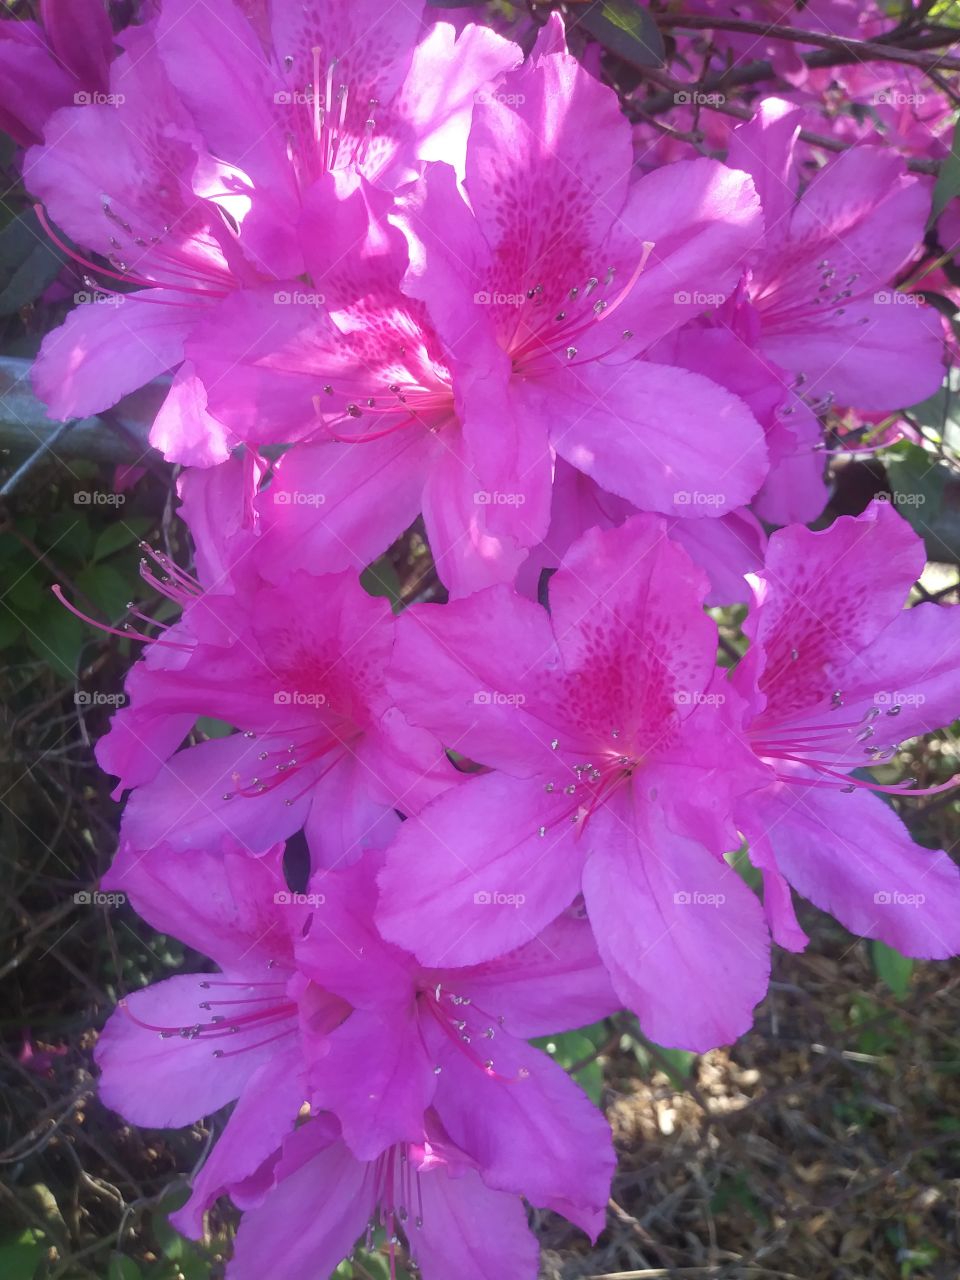 absolutely beautiful flowers blooming all over they are a perfect pink with no flawed flowers. AMAZING